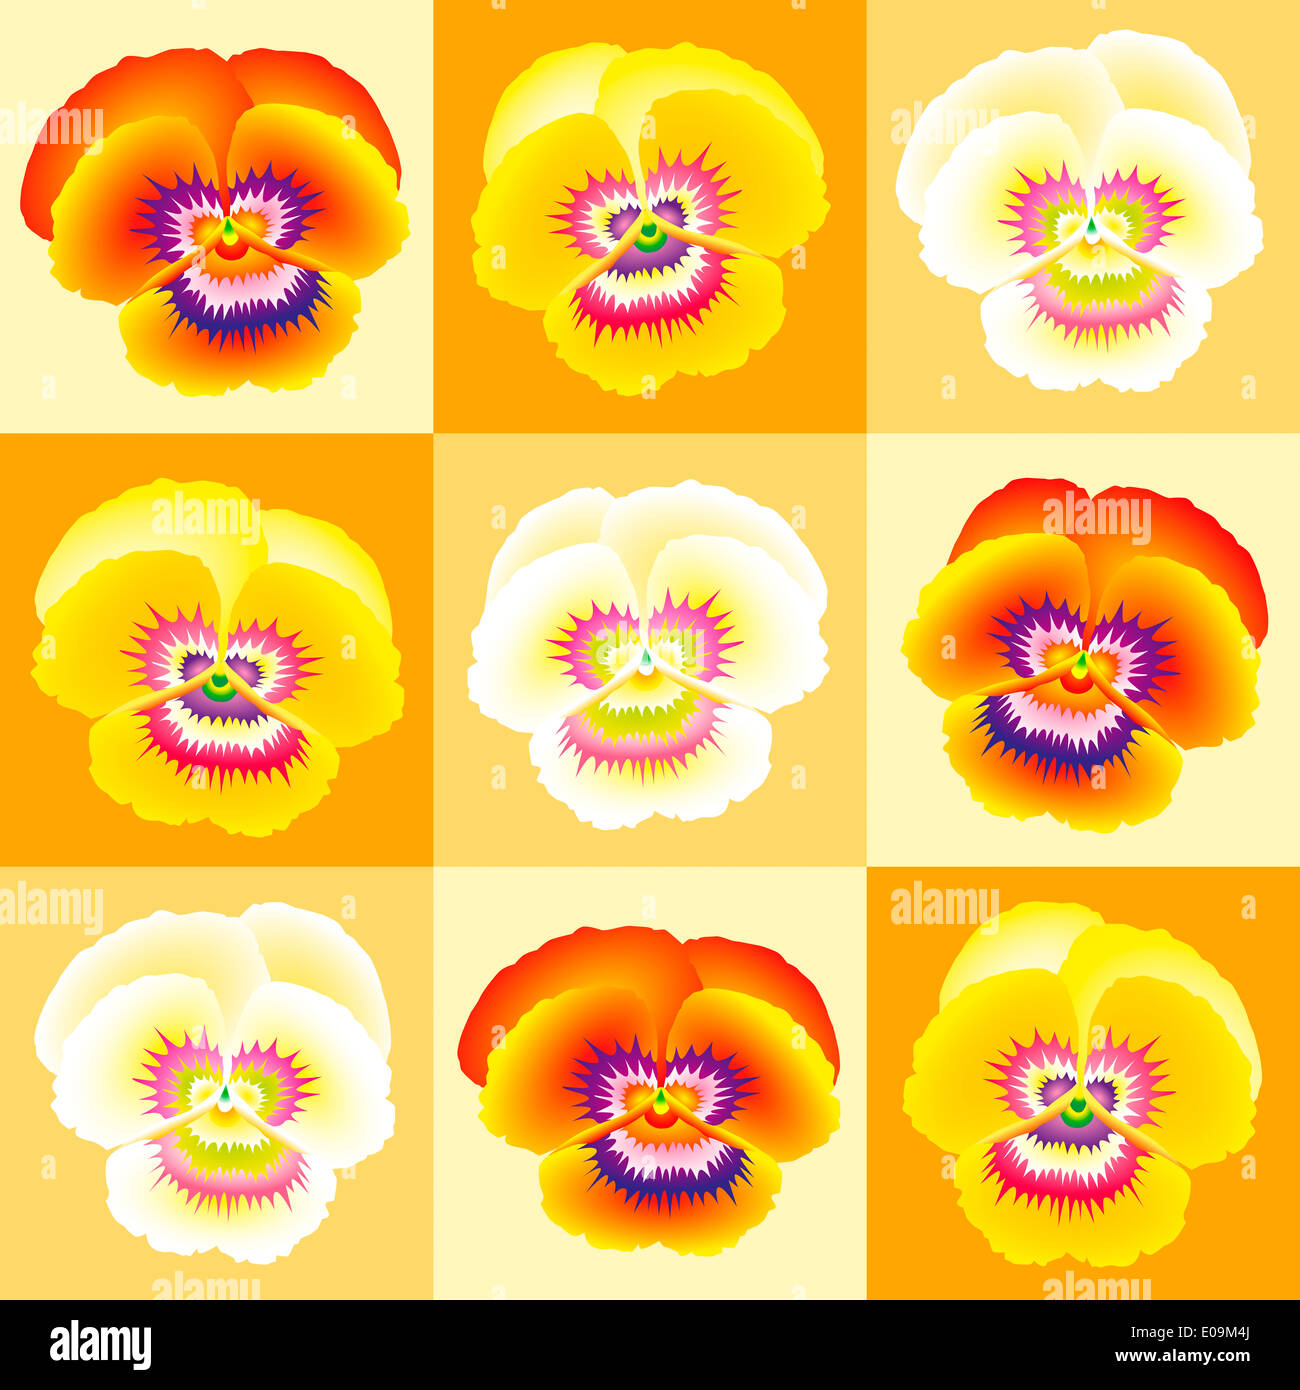 Orange pansy wallpaper - seamless background can be created. Stock Photo